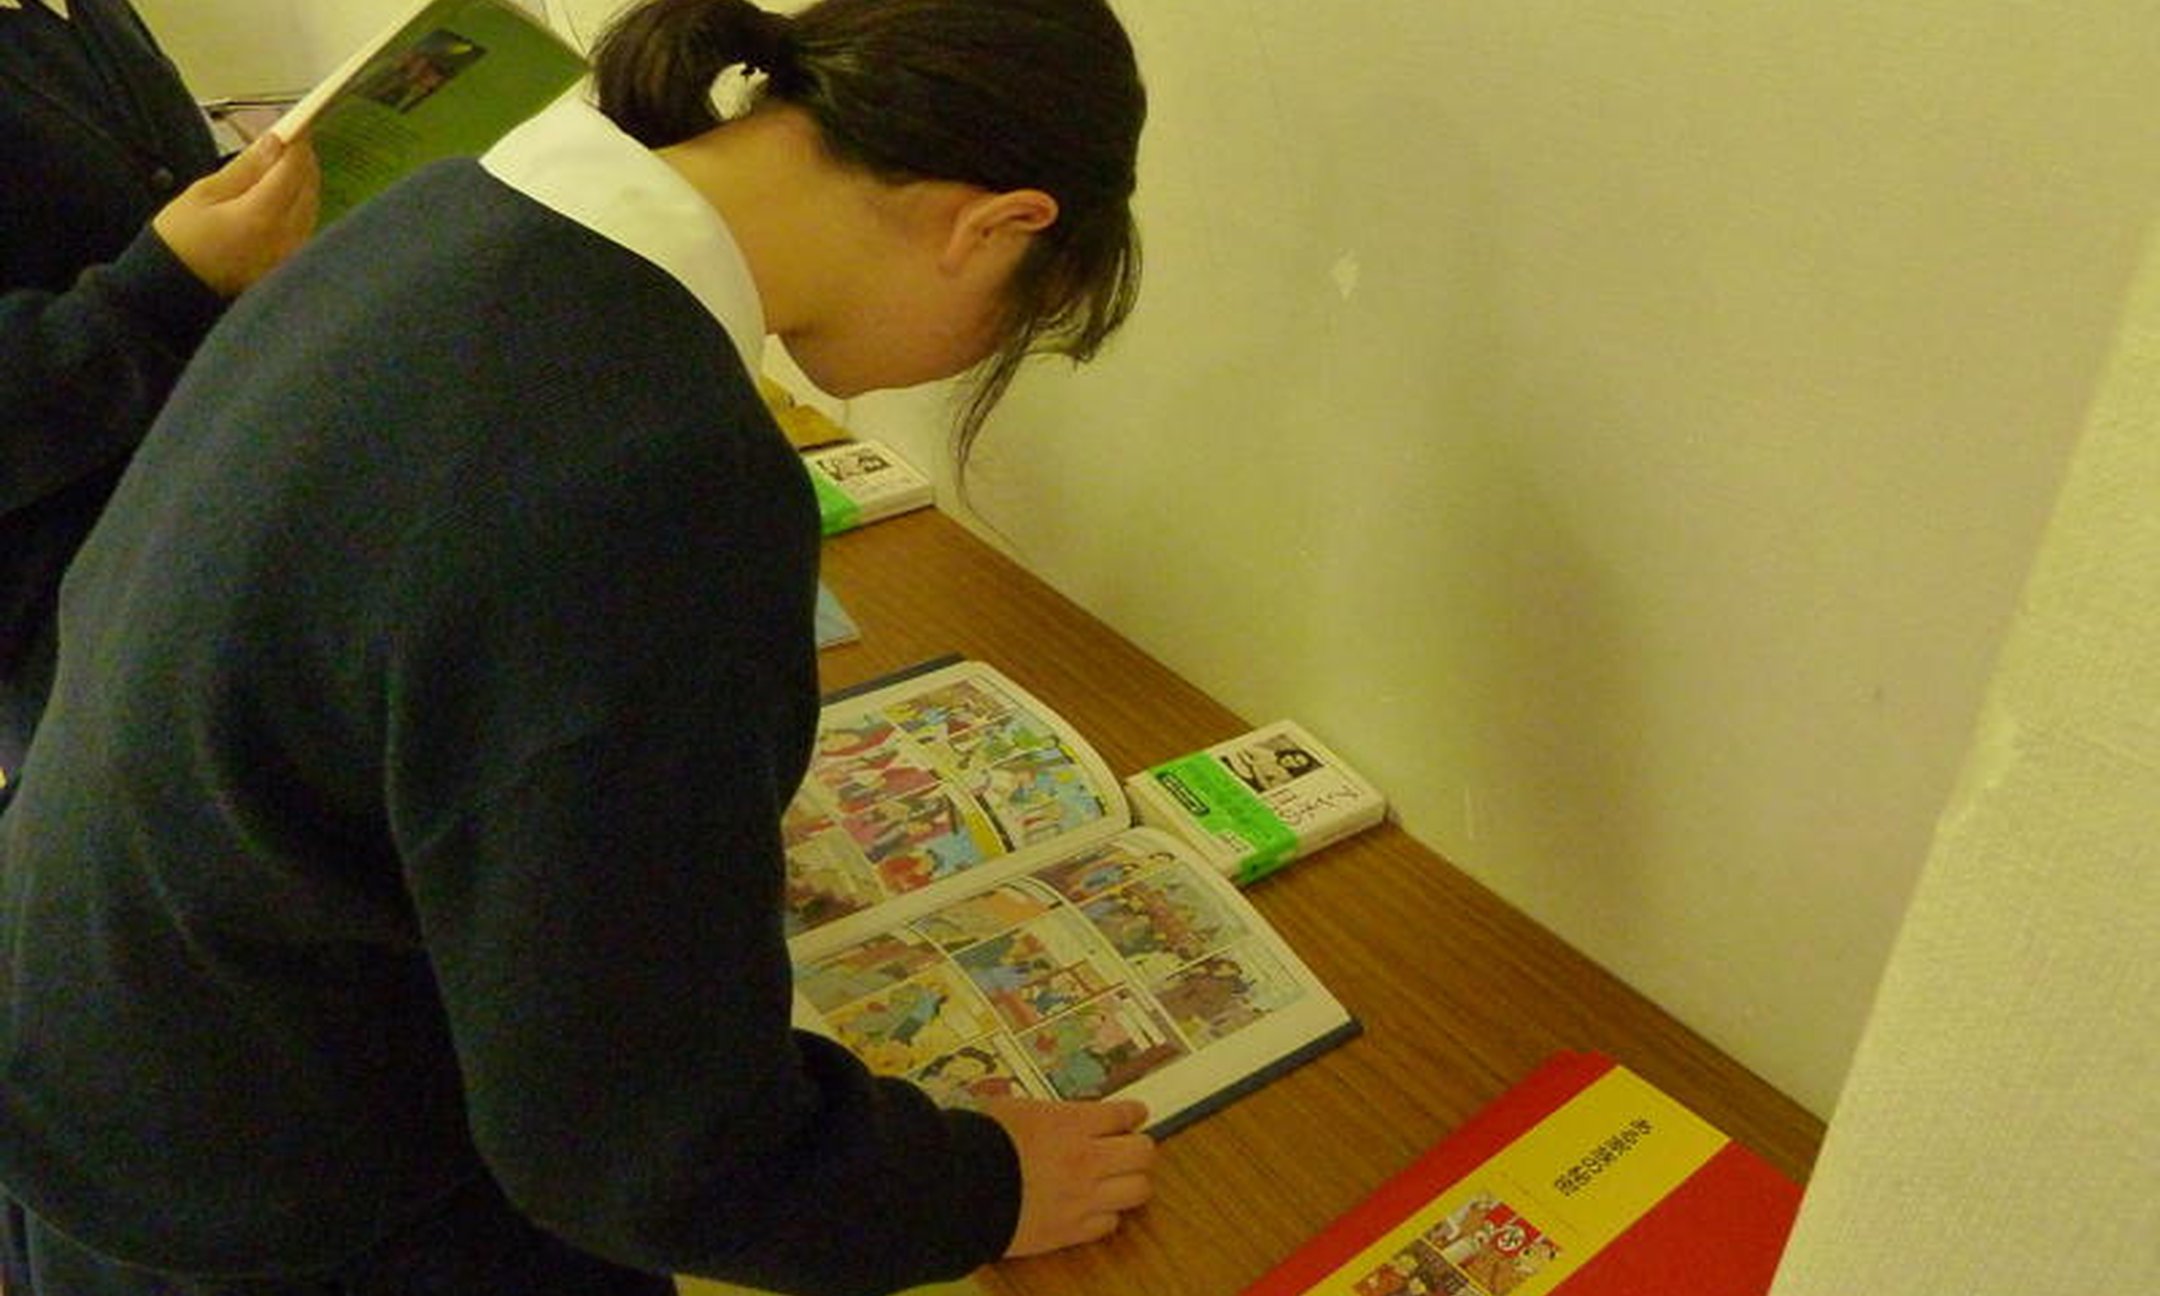 Educational materials in Japanese